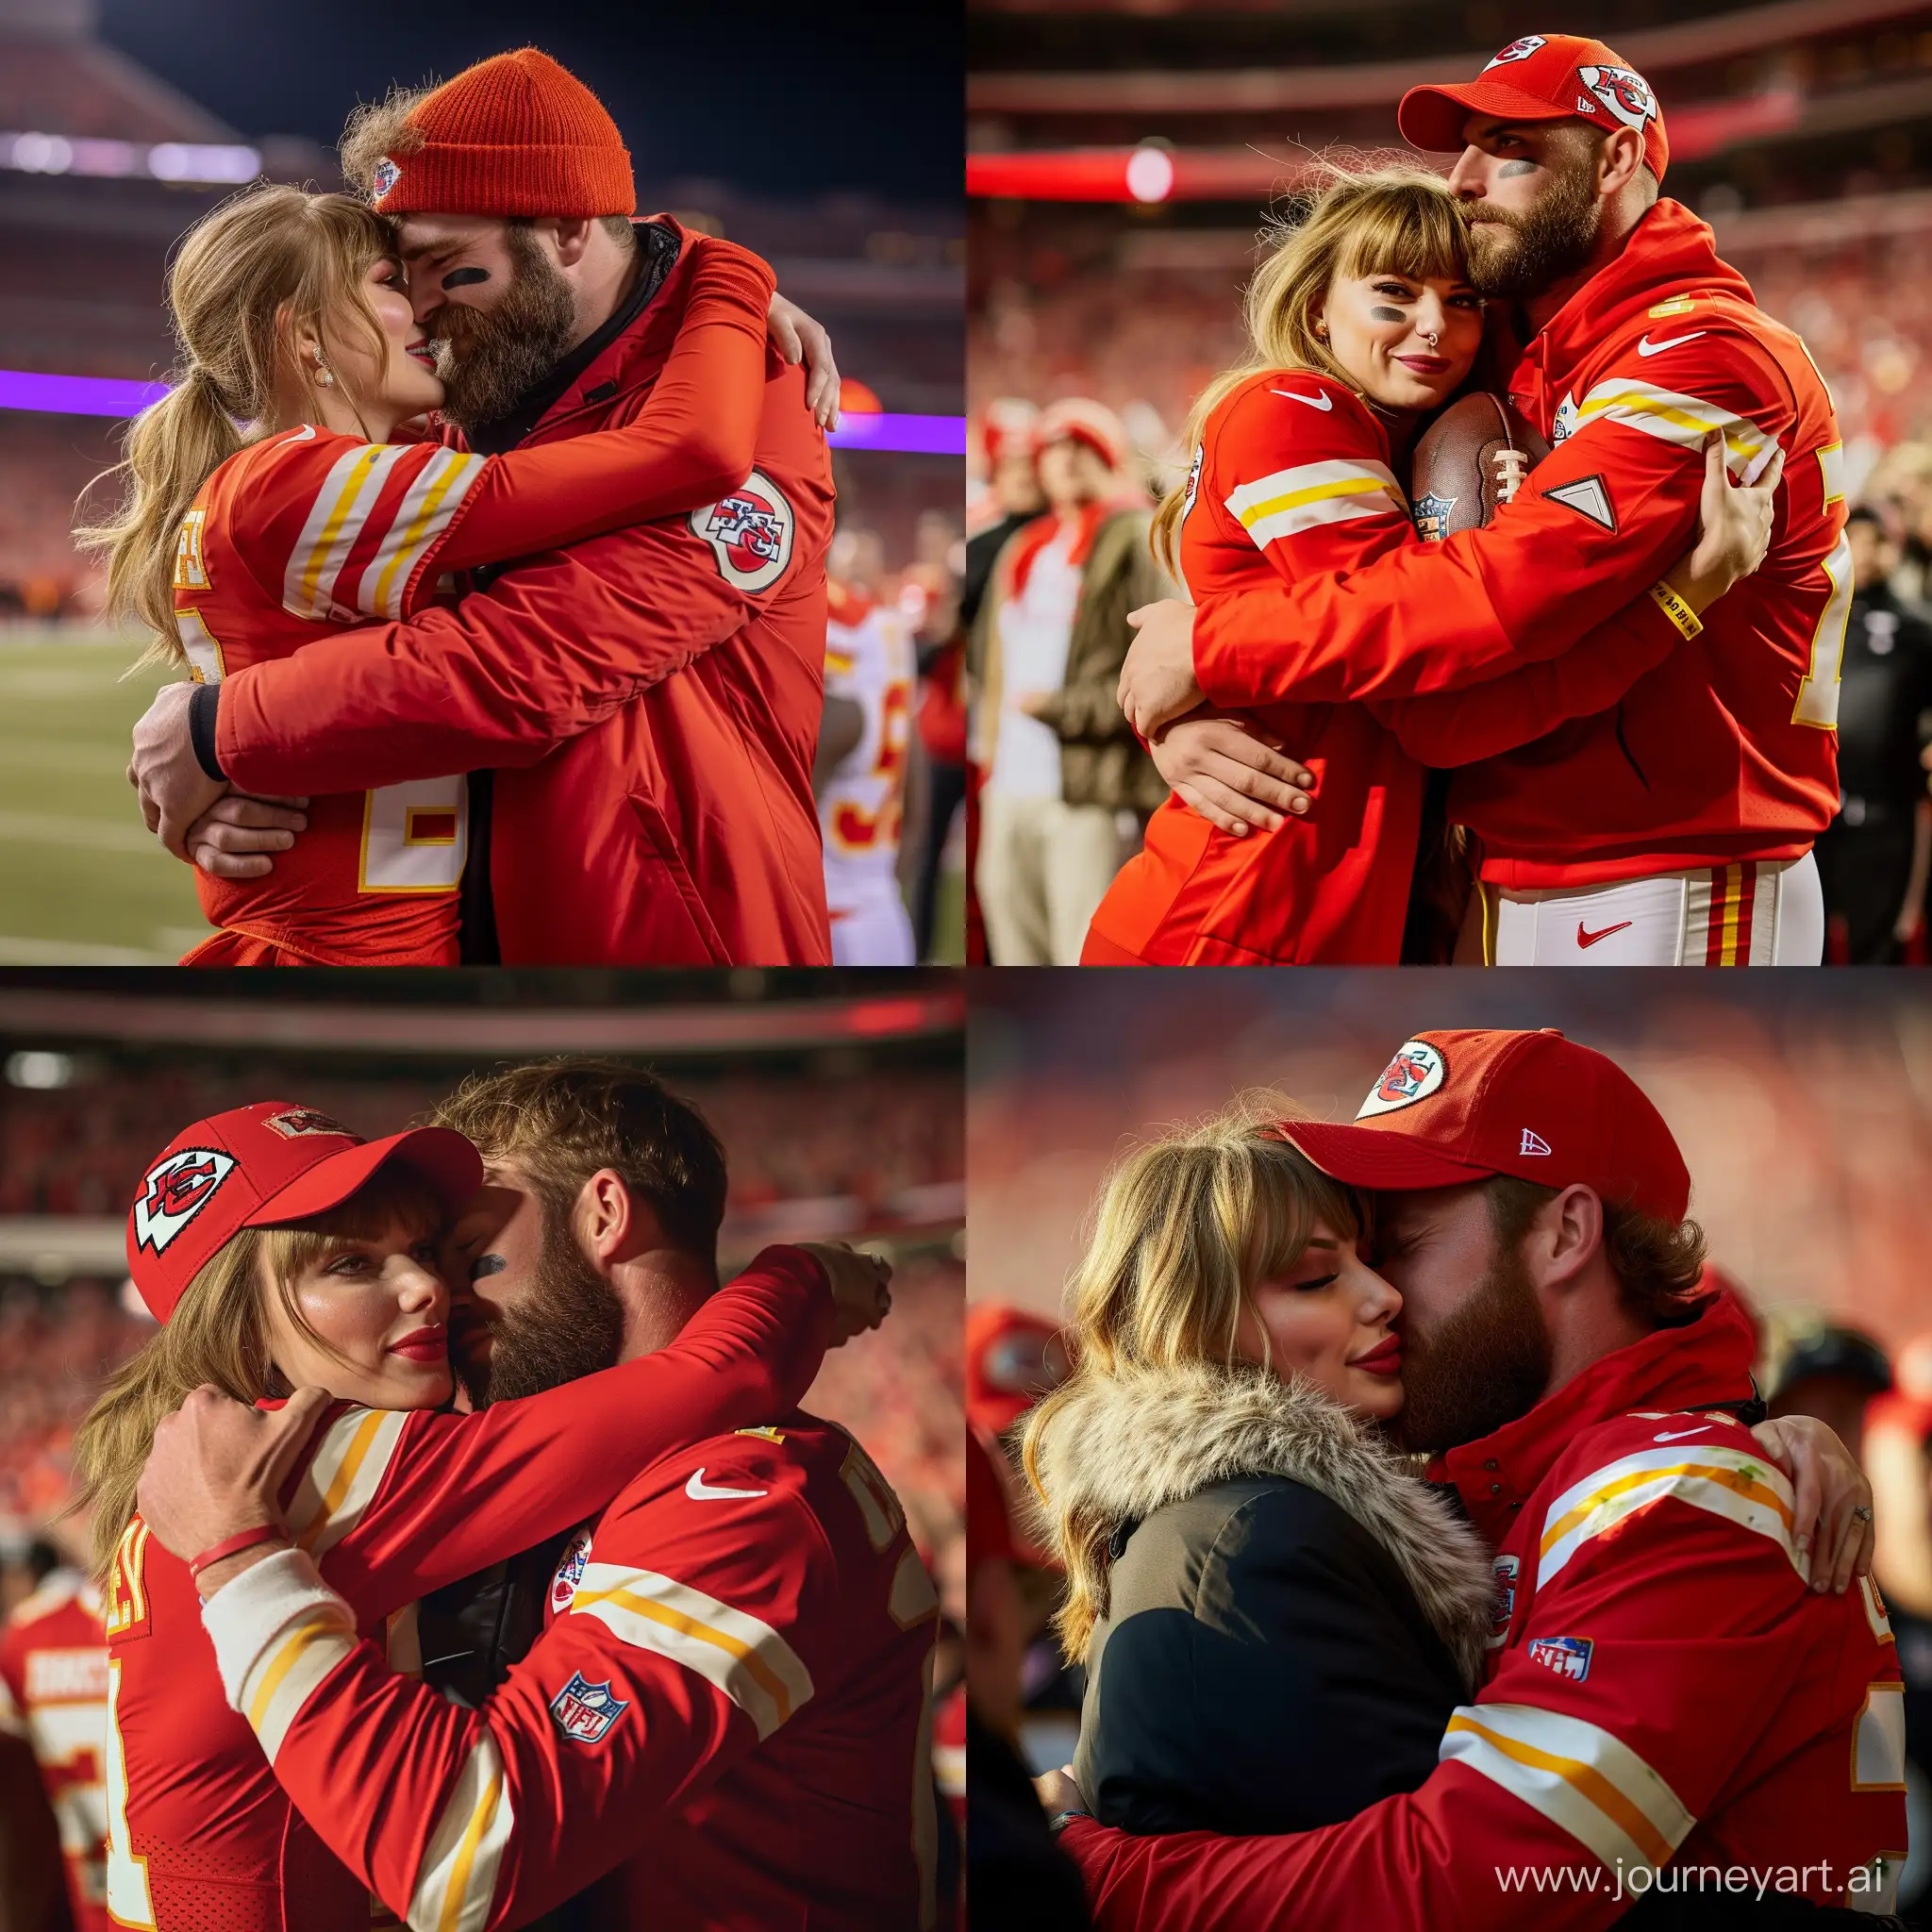 Taylor-Swift-and-Travis-Kelce-Celebrate-Kansas-City-Chiefs-Super-Bowl-Win-with-Heartwarming-Hug